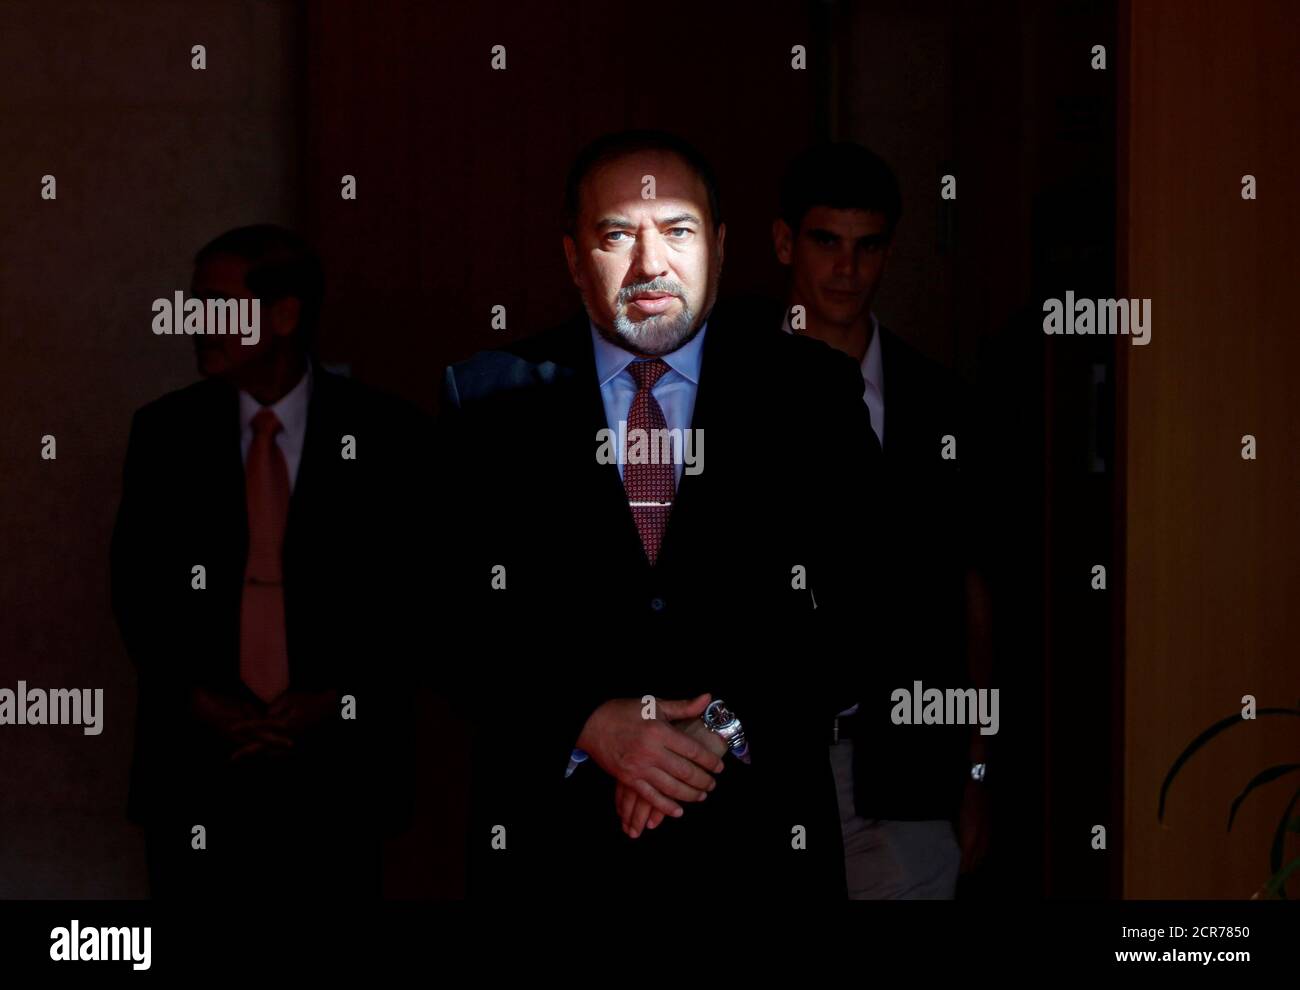 Israel's former Foreign Minister Avigdor Lieberman waits for the arrival of European Union's Foreign Policy Chief Catherine Ashton to their meeting in Jerusalem August 29, 2011. REUTERS/Baz Ratner/File Photo Stock Photo